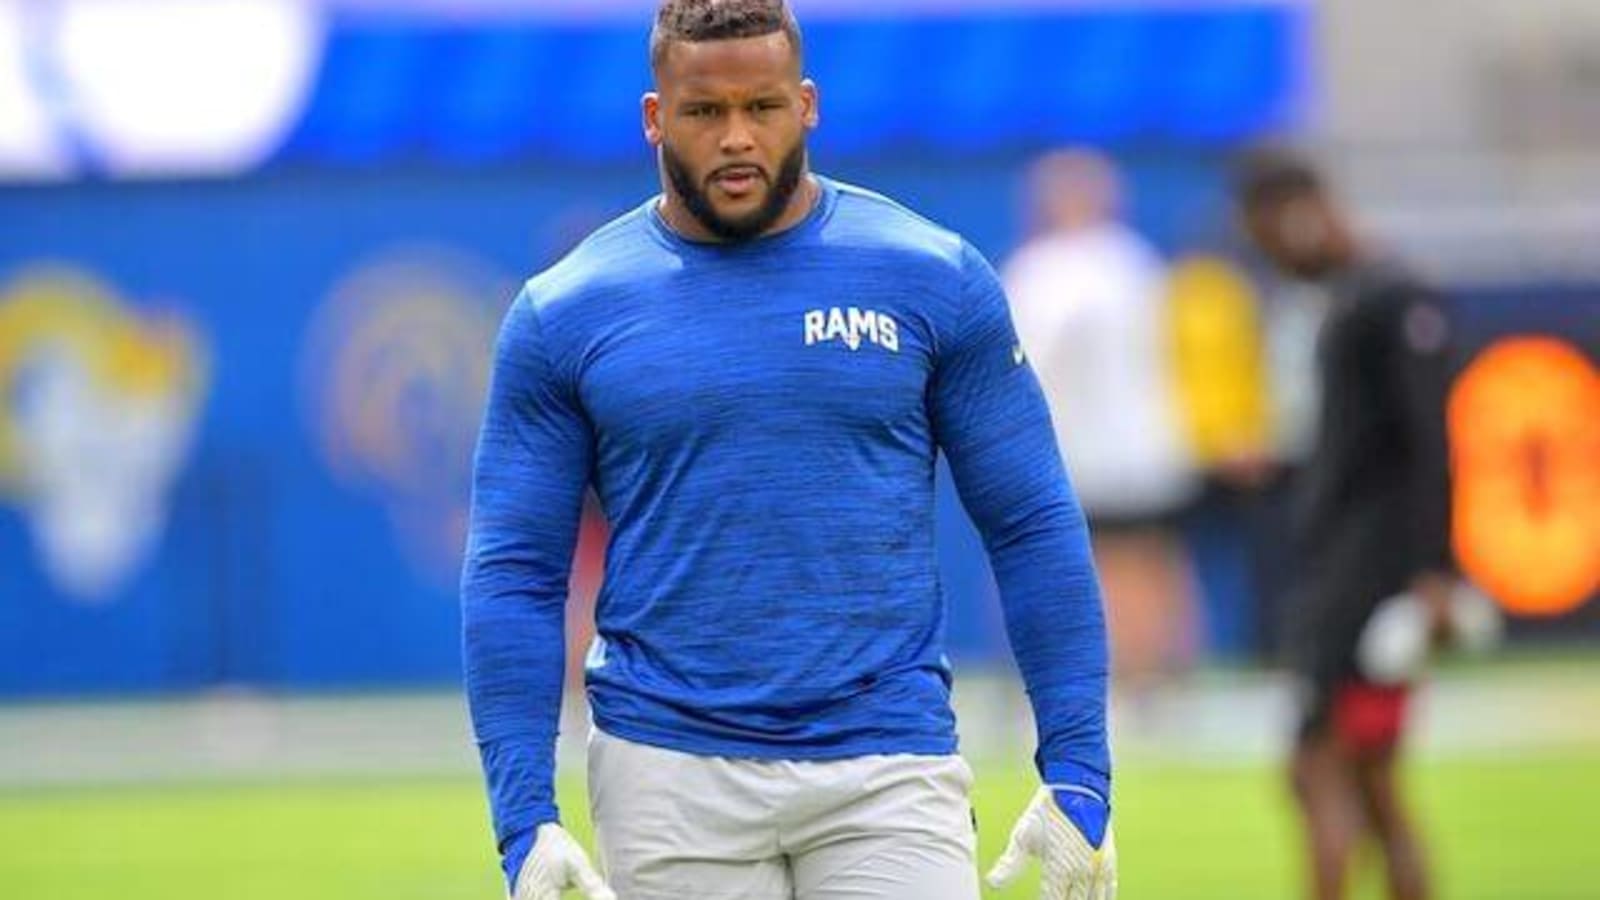  Aaron Donald Potentially Dealing With High Ankle Sprain